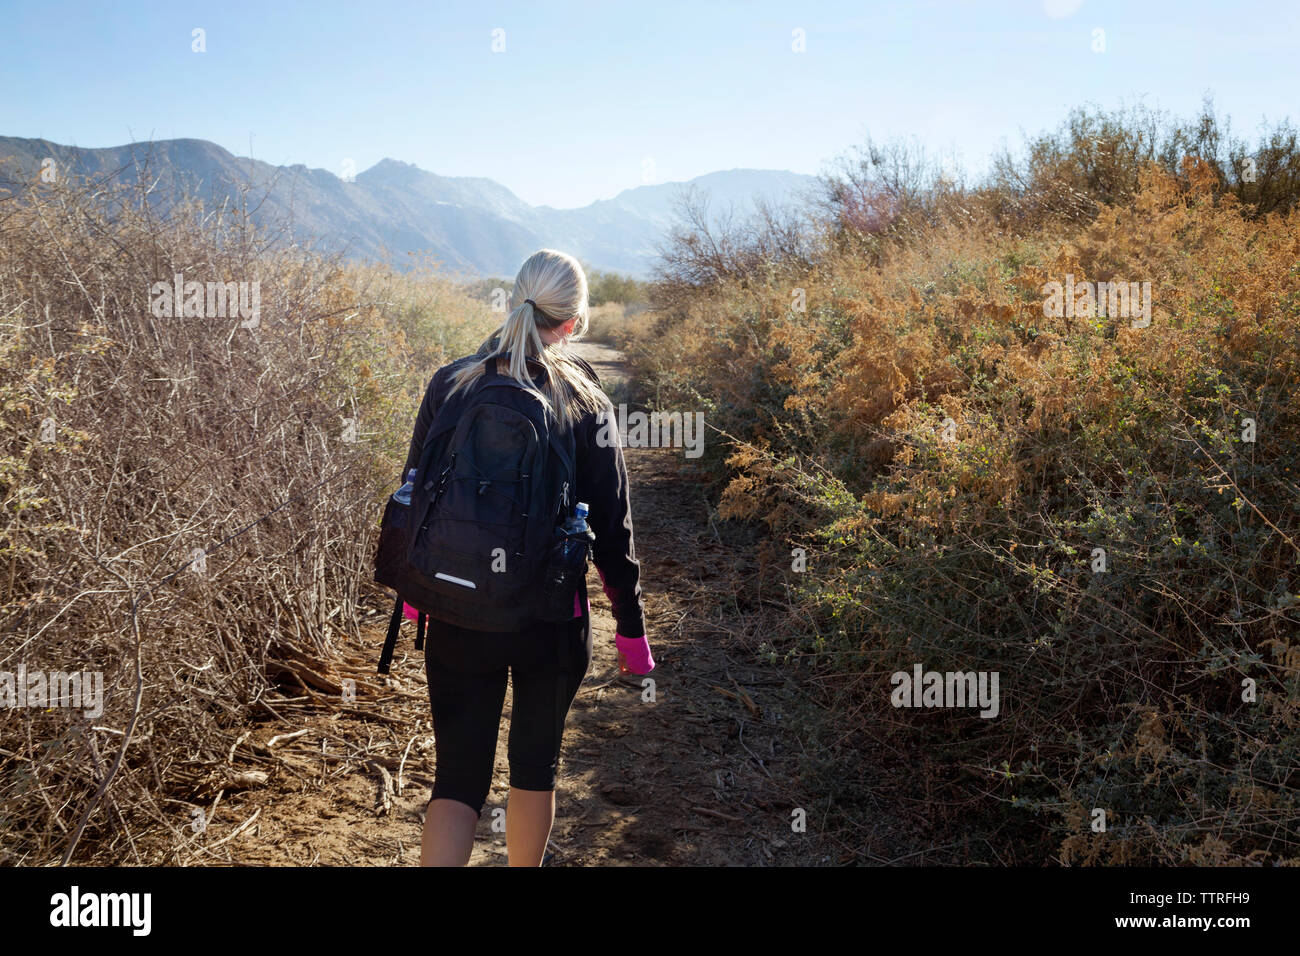 Rear view of hiker walking amidst plants against clear sky Stock Photo